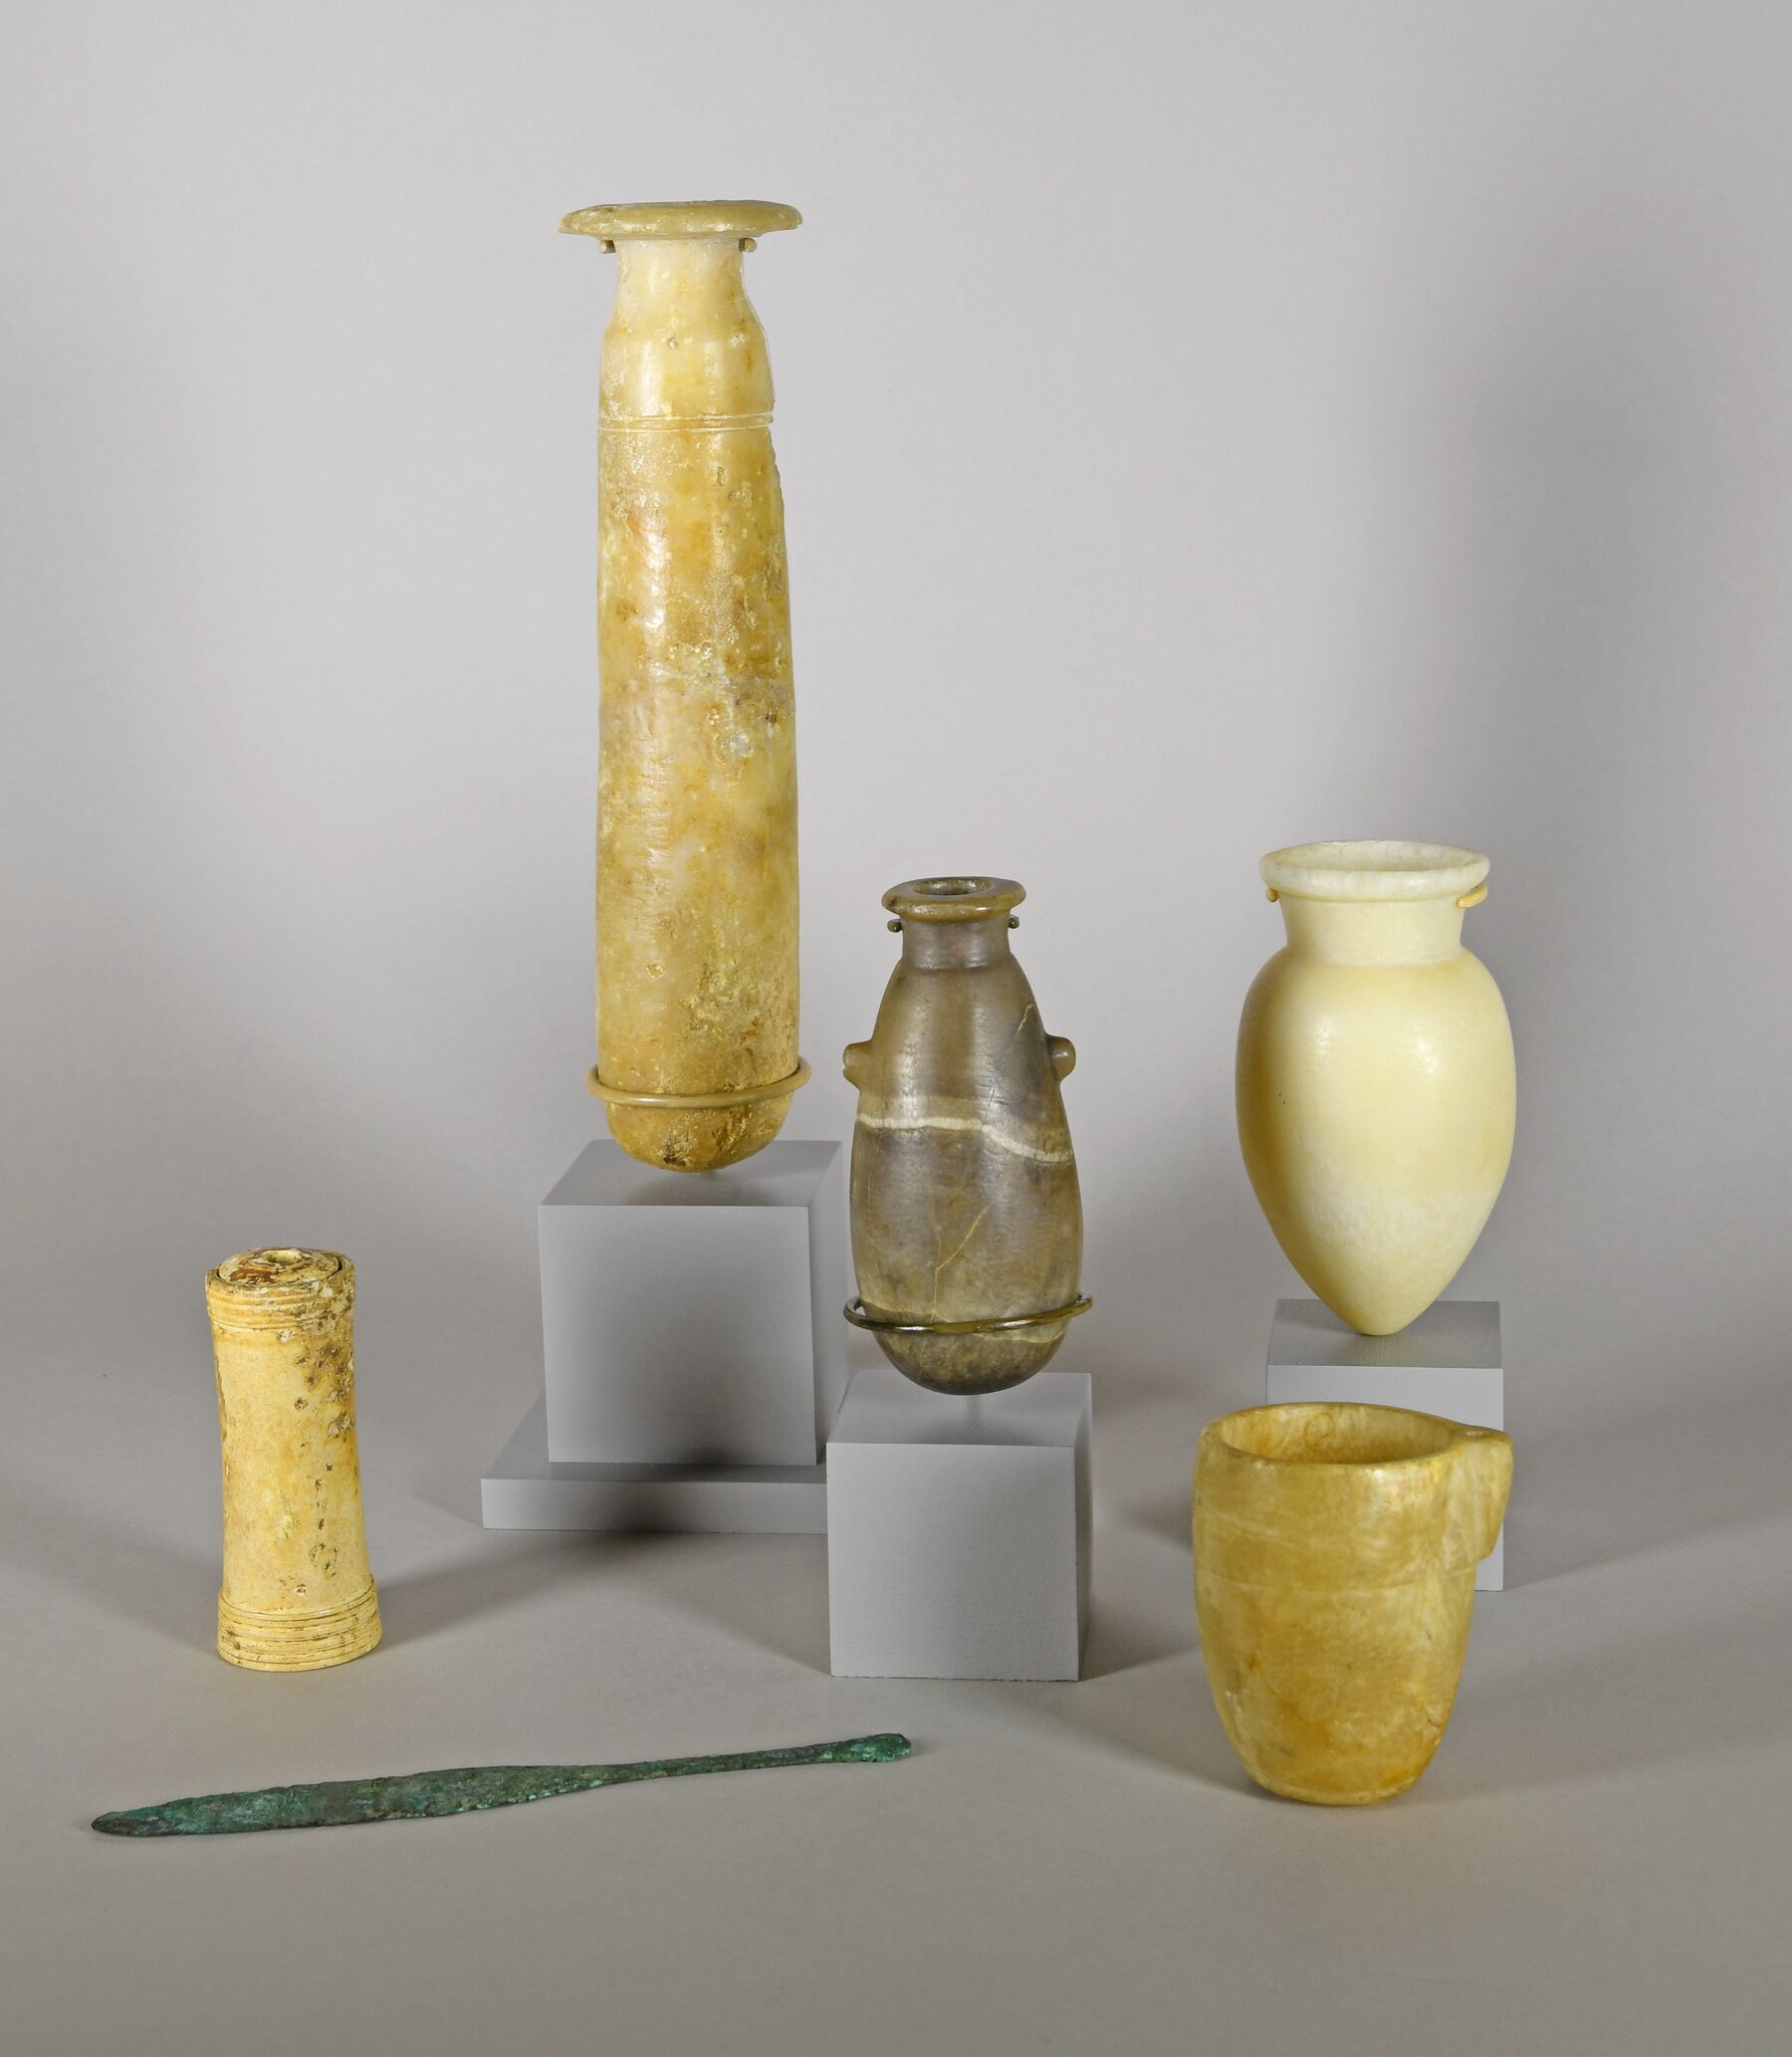 Group shot of cosmetic vessels